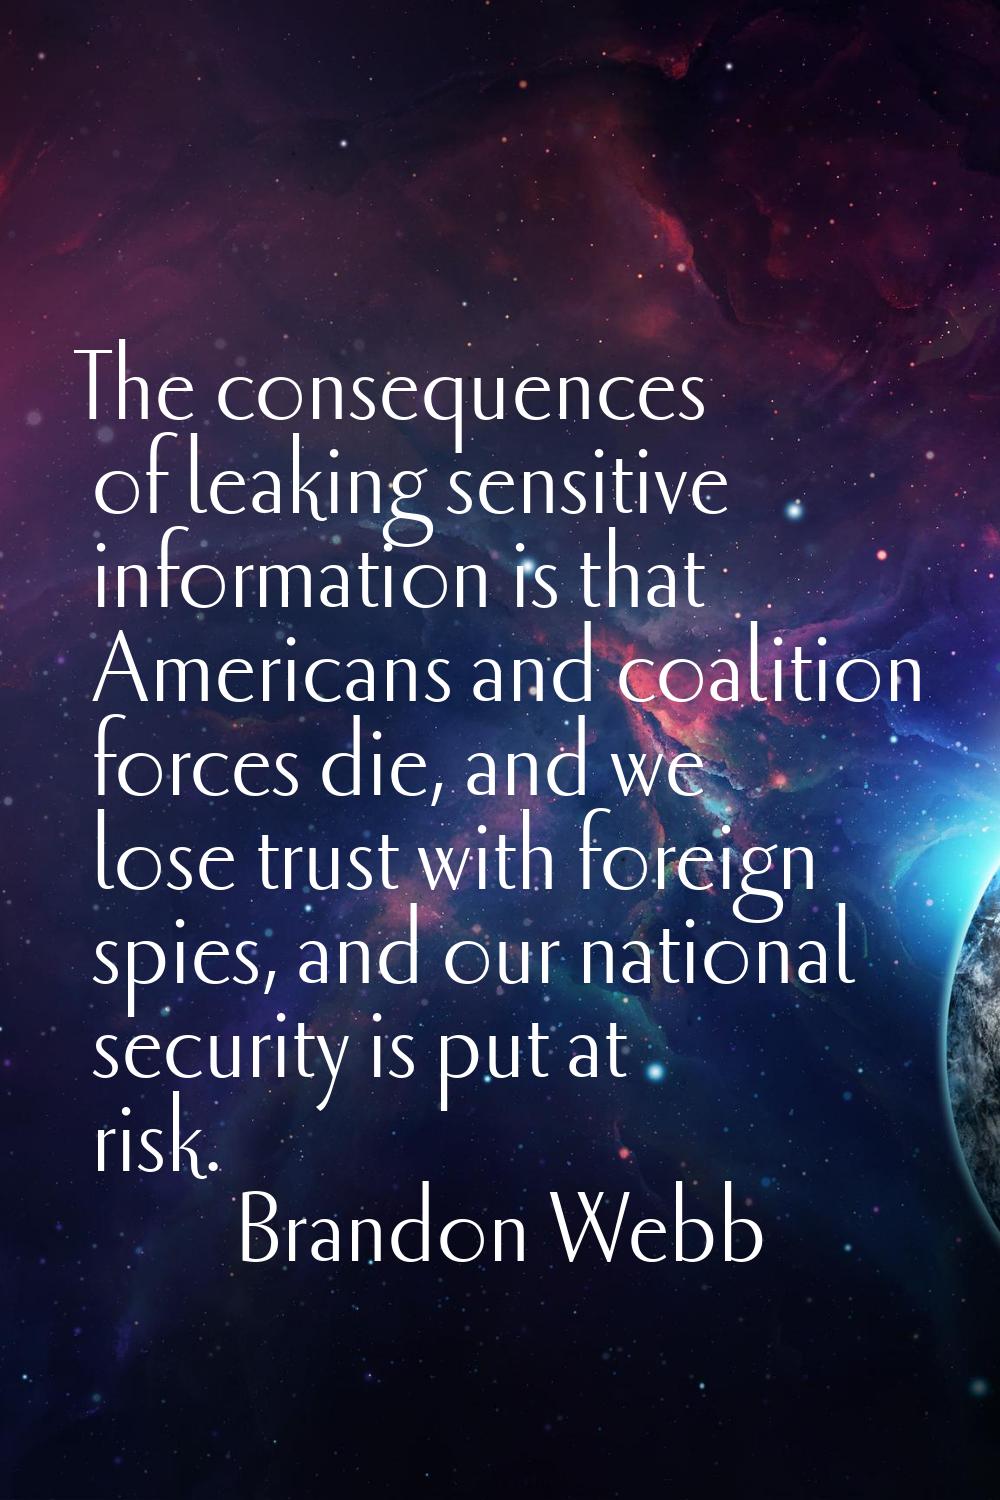 The consequences of leaking sensitive information is that Americans and coalition forces die, and w